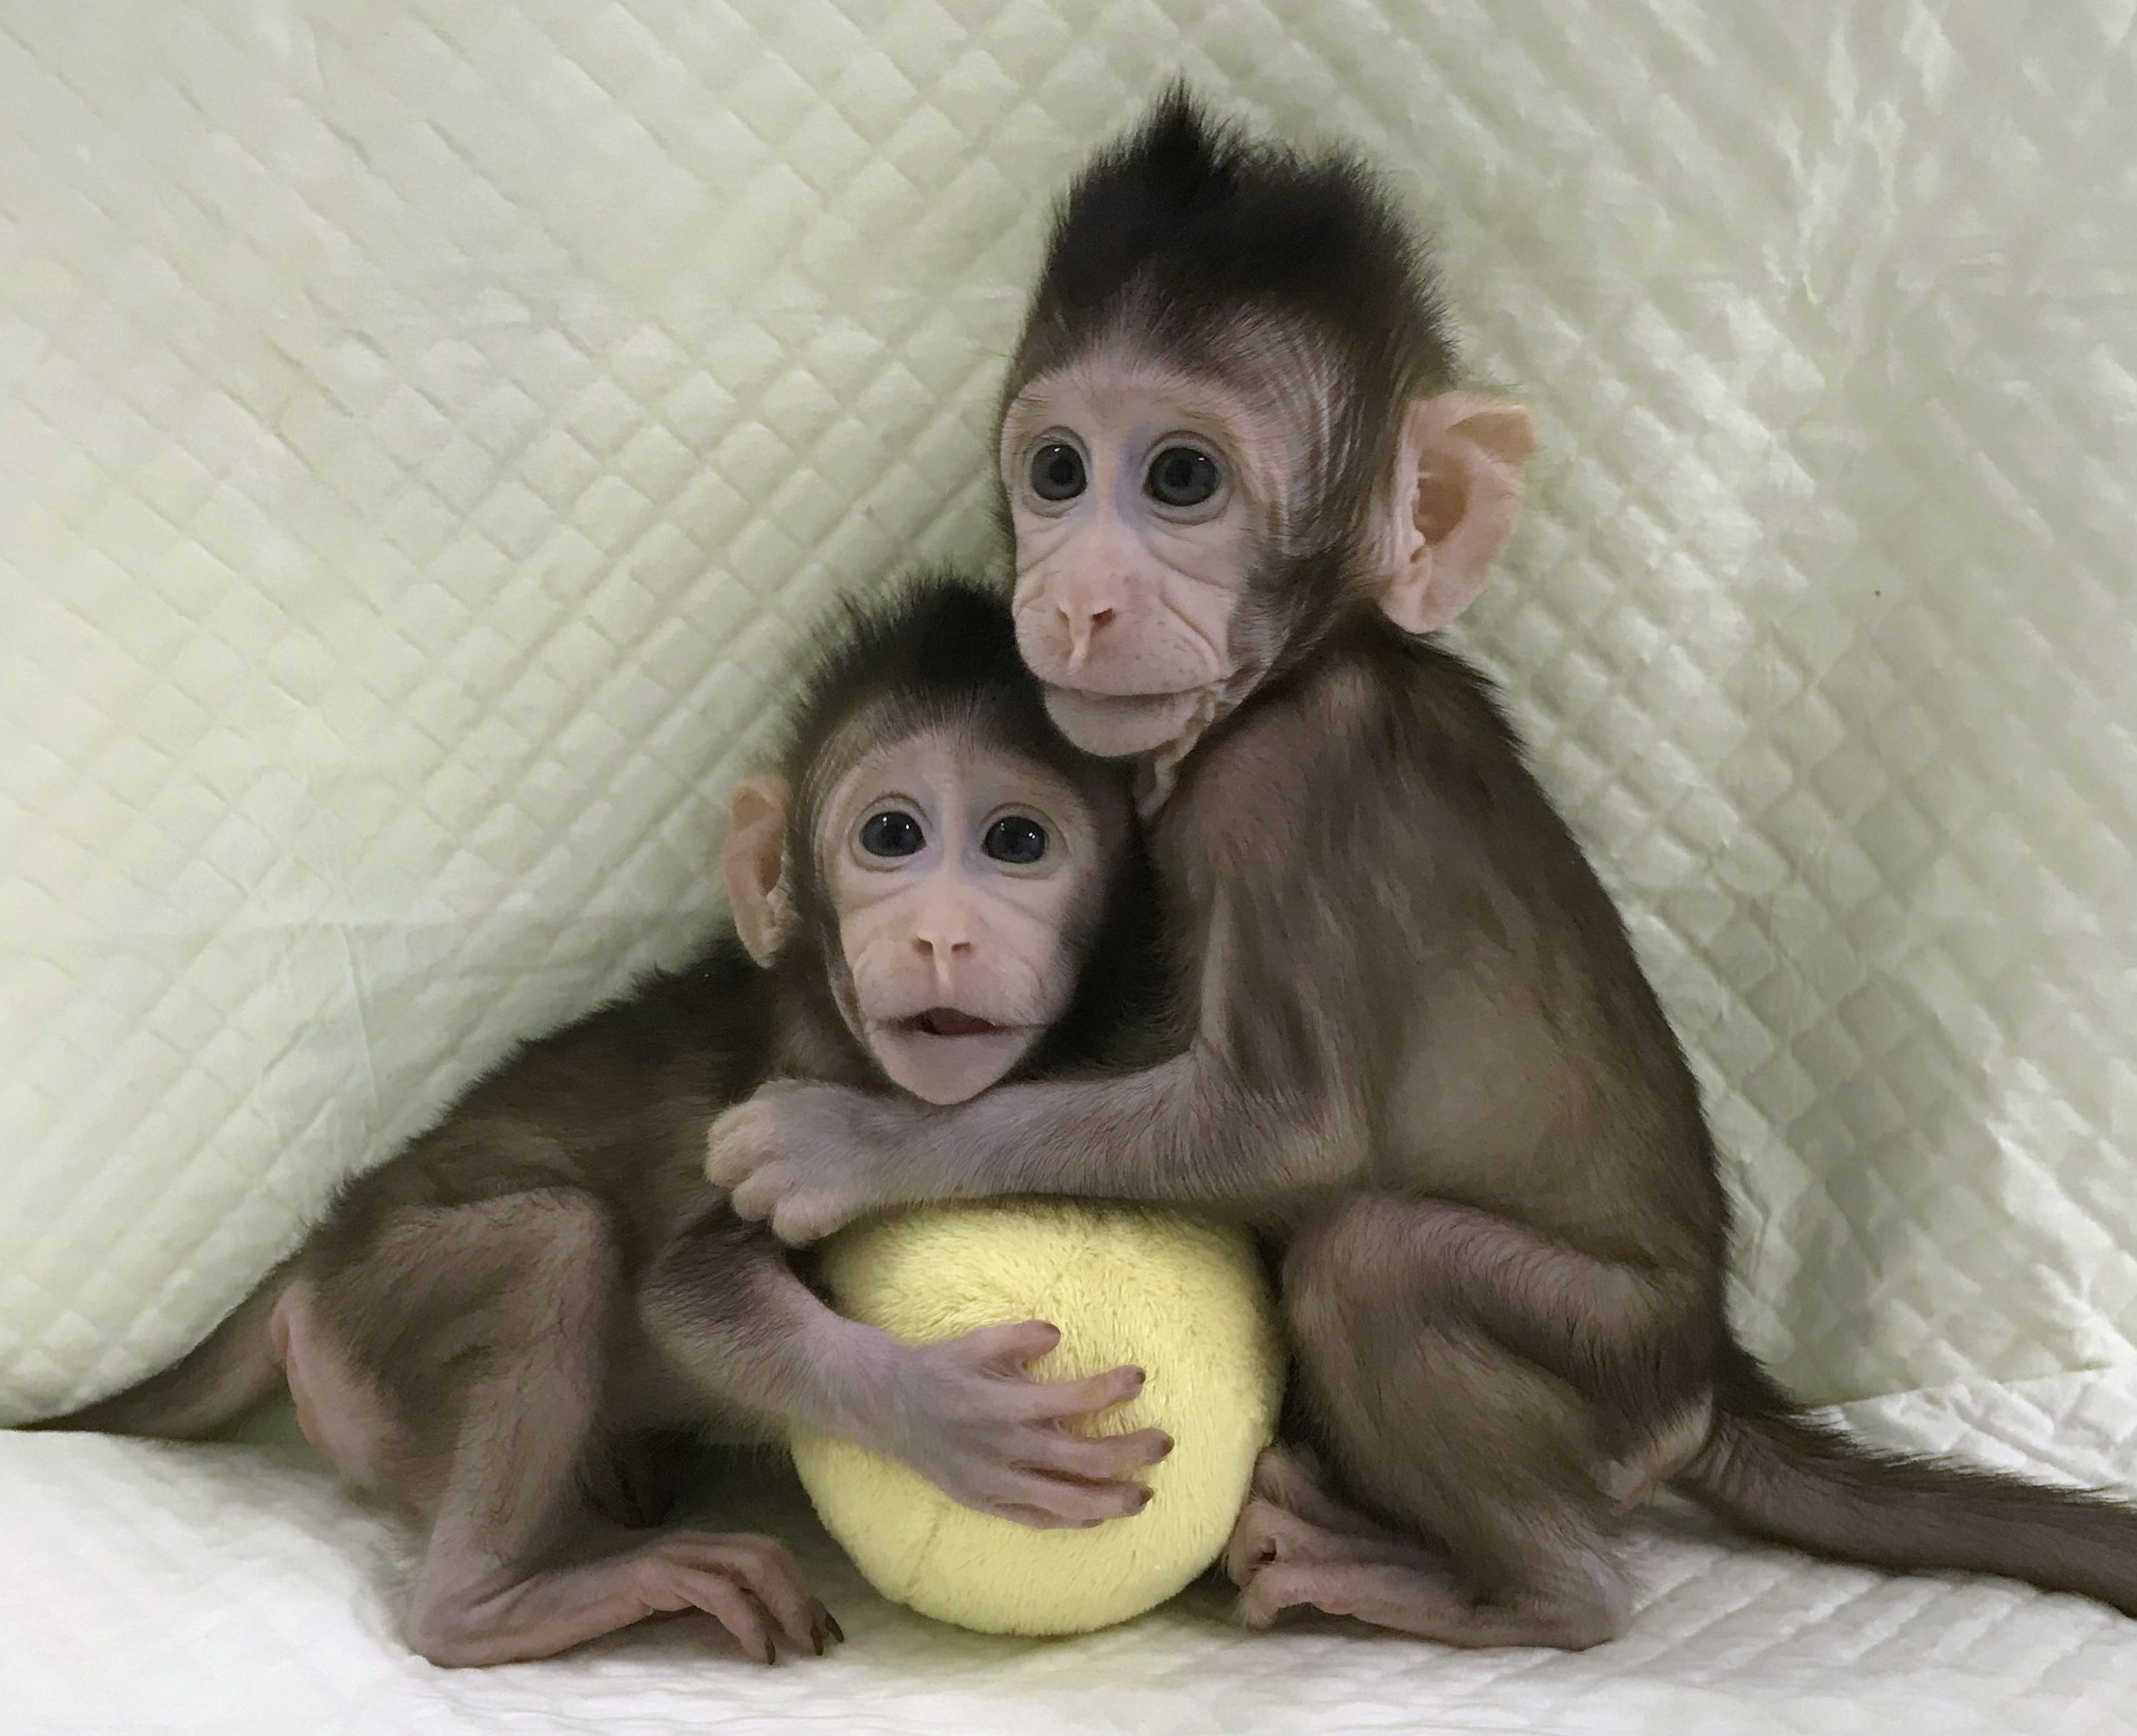 Identical long-tailed macaques Zhong Zhong and Hua Hua were born eight and six weeks ago, respectively, at a laboratory in China. (Qiang Sun and Mu-ming Poo/Chinese Academy of Sciences/PA Wire)